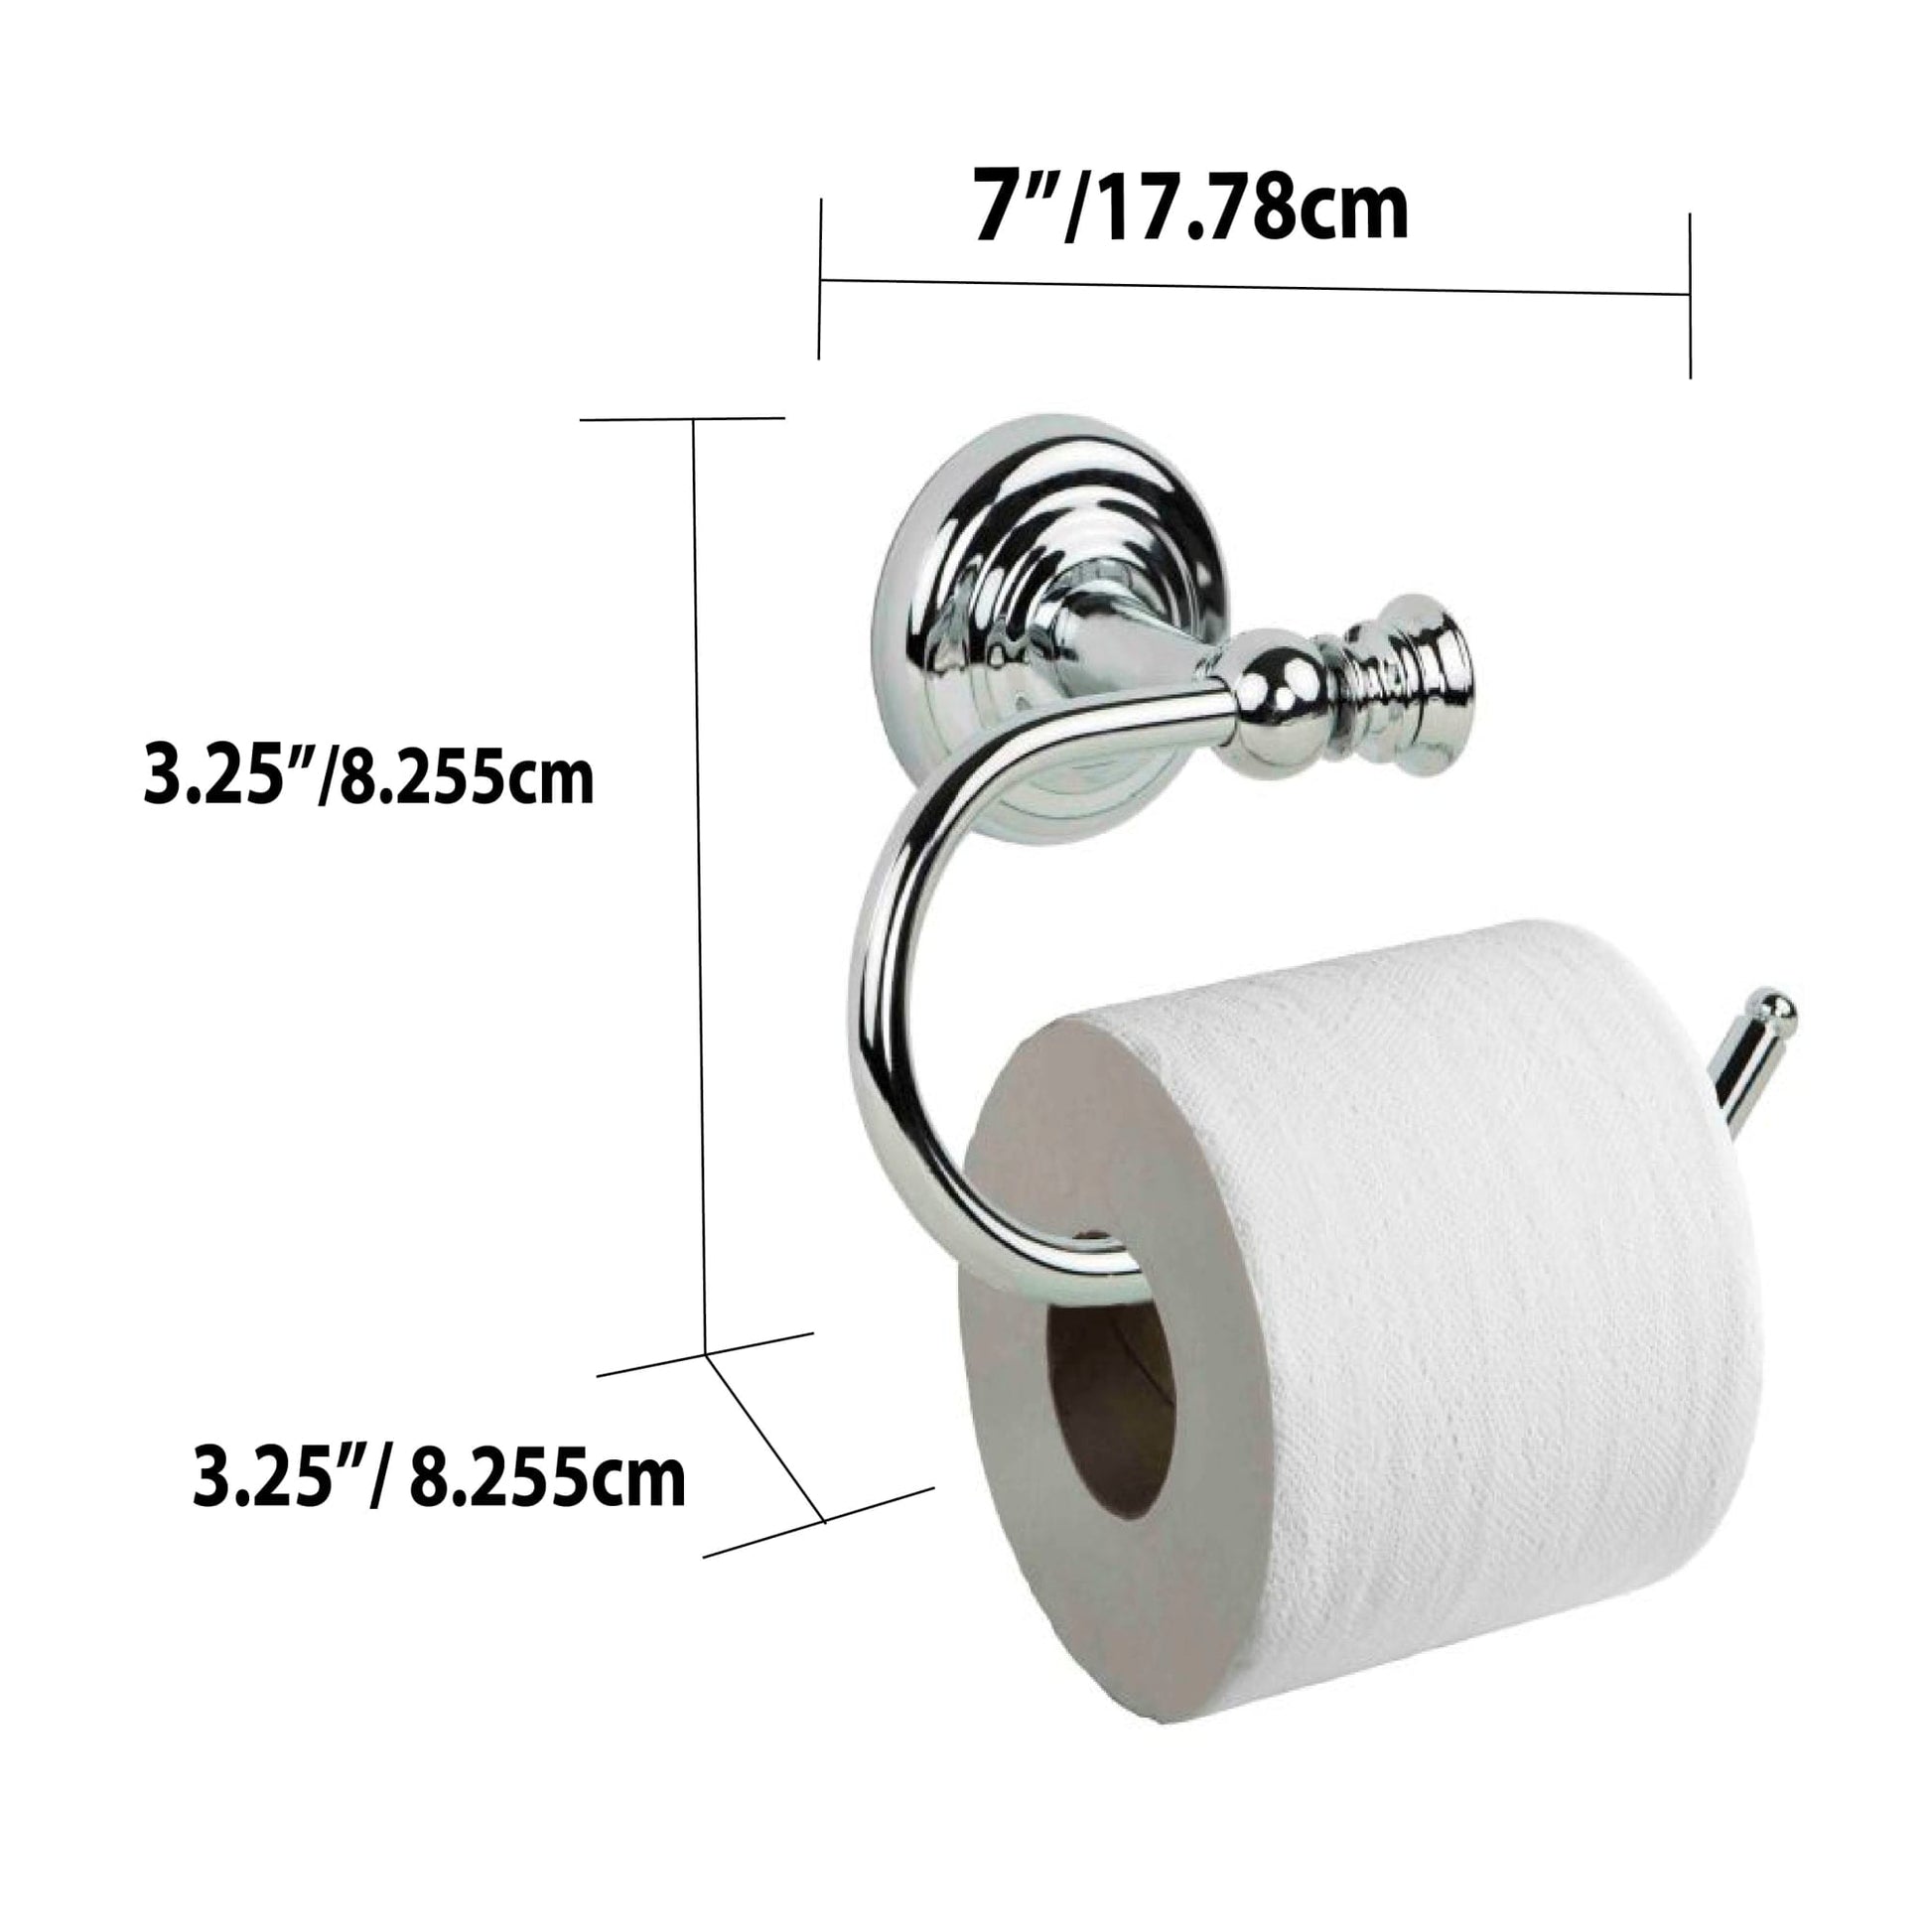 Home Basics Black Metal Heavy Duty Toilet Paper Holder with